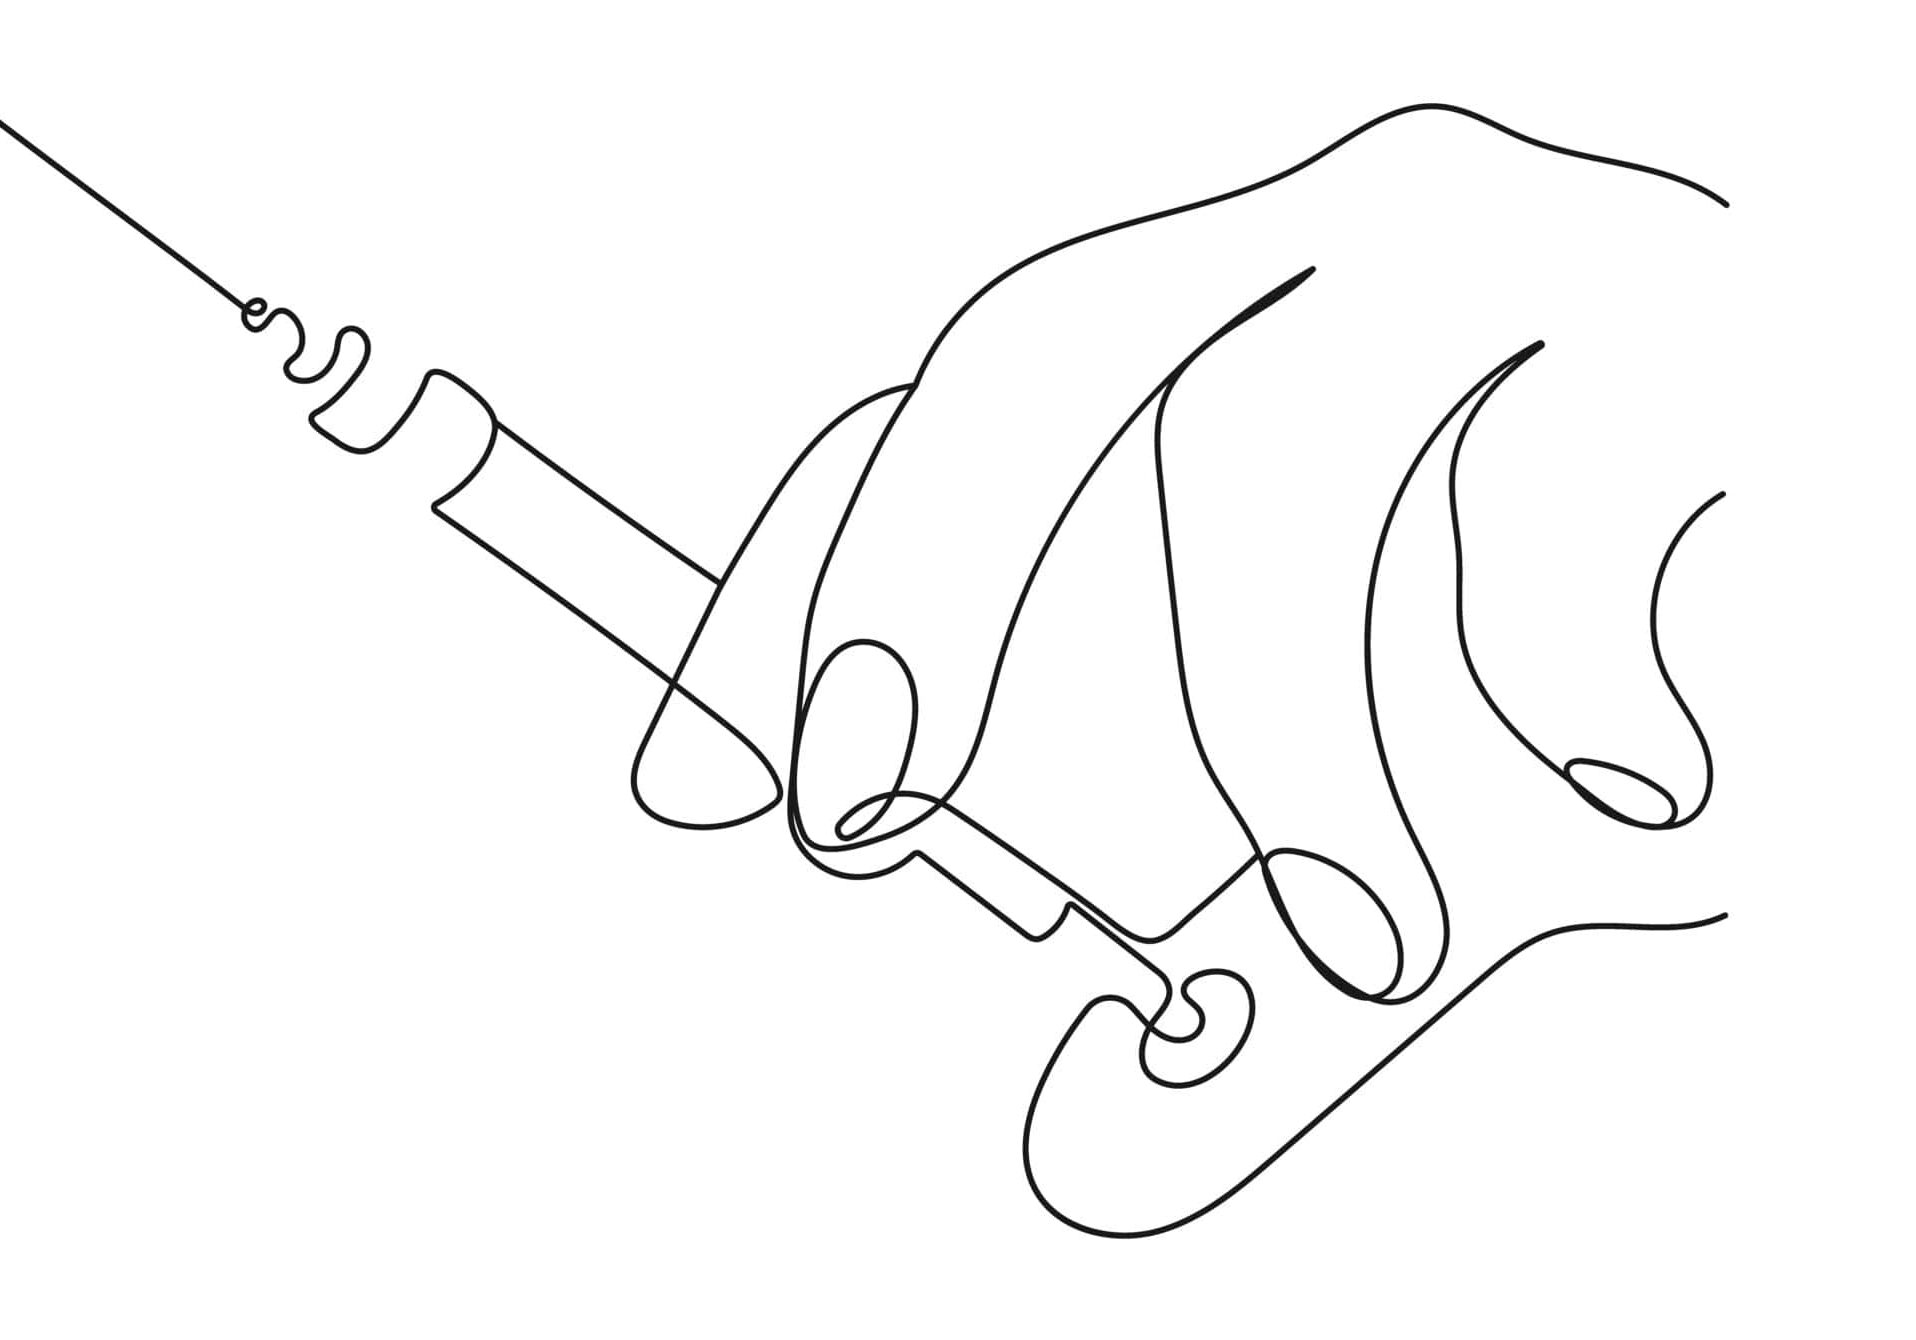 Hand holding syringe with needle. One line art. Vaccination, health care injection. Medical concept. Hand drawn vector illustration.